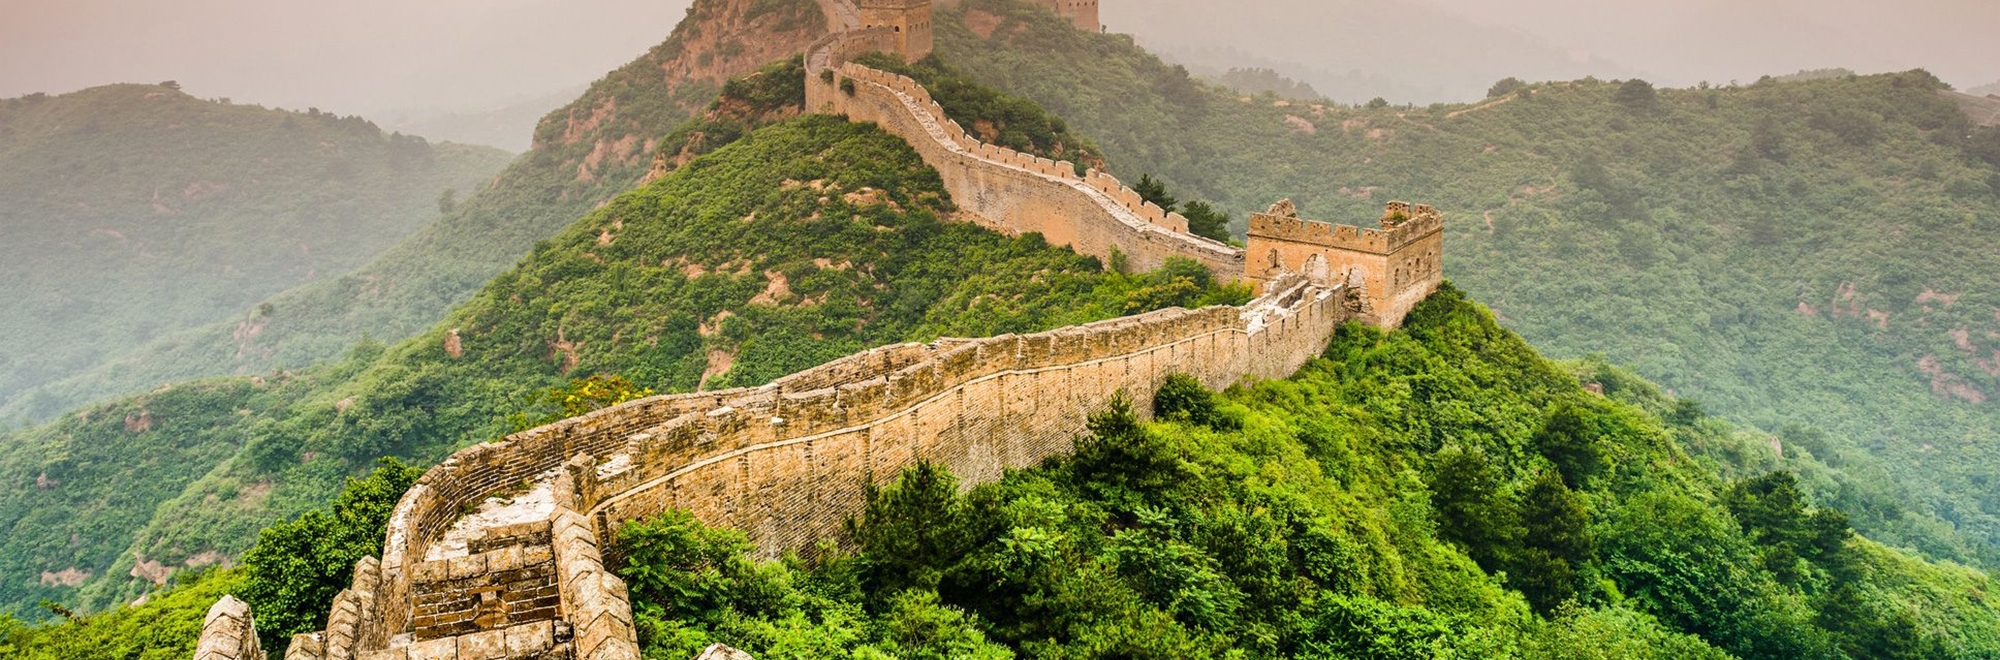 Did Airbnb's prize of a lifetime at the Great Wall of China miss the cultural point?